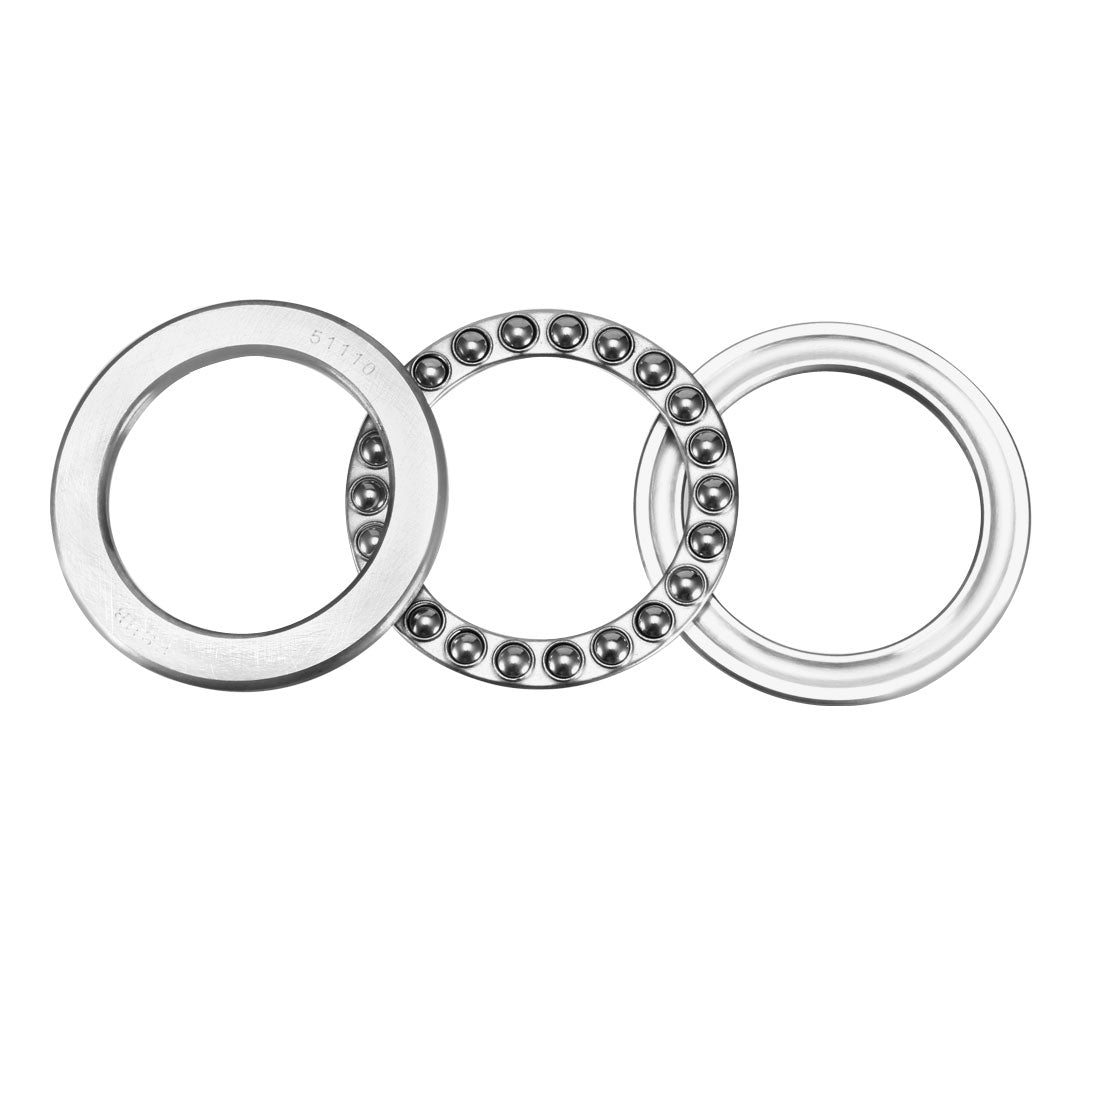 uxcell Uxcell 51110 Single Direction Thrust Ball Bearings 50mm x 70mm x 14mm Chrome Steel